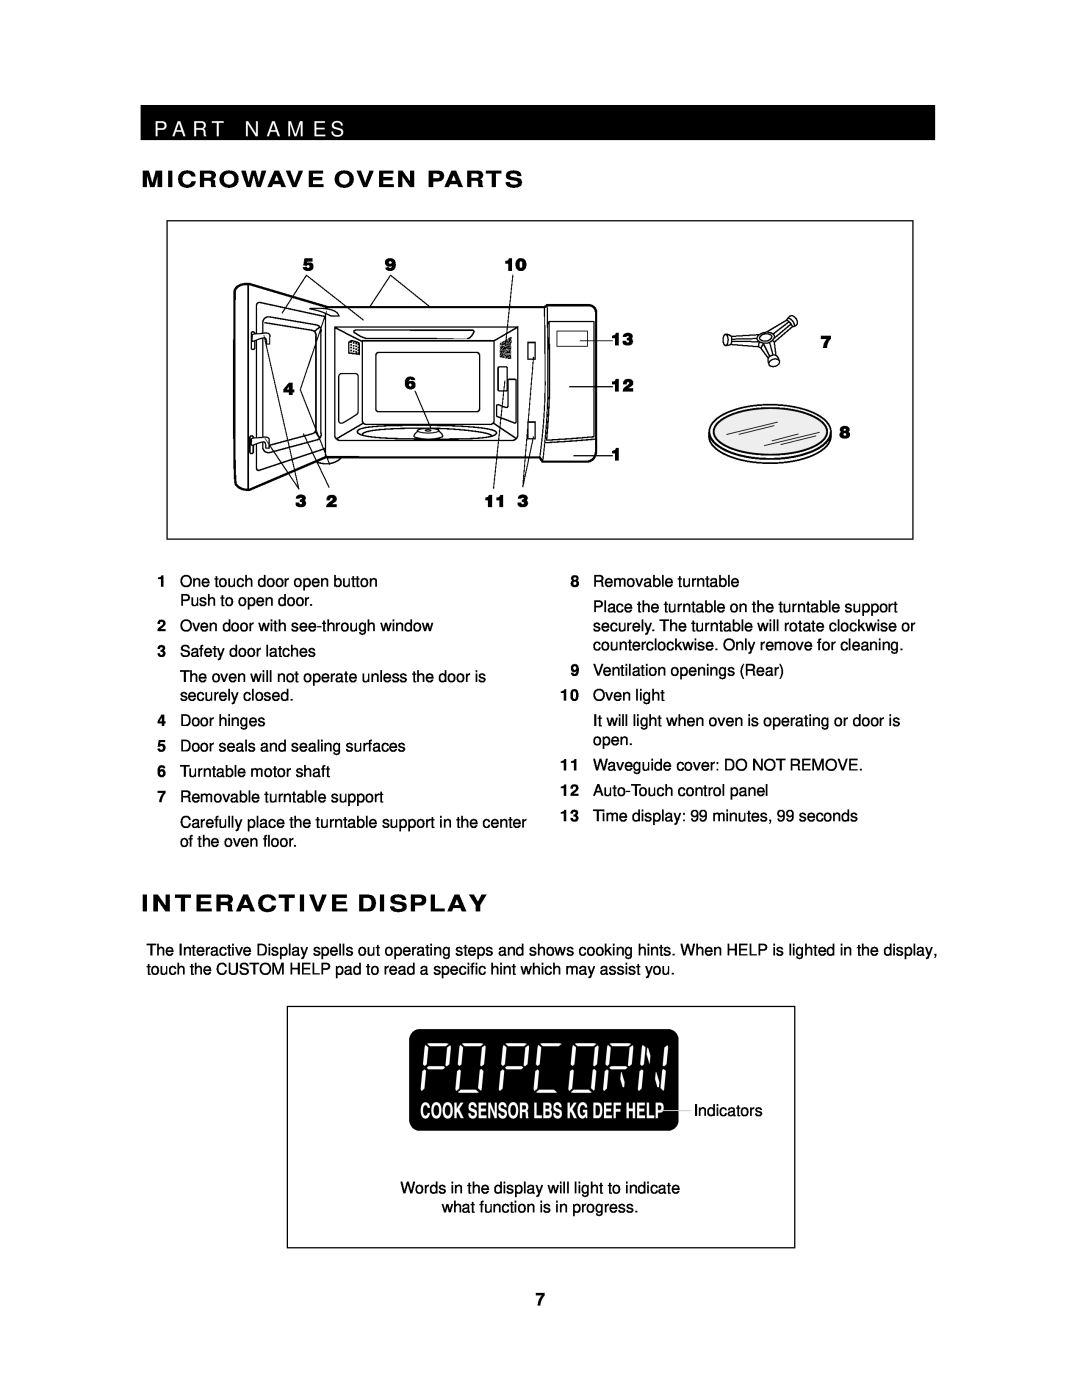 Sharp R-420E, R-425E, R-519E operation manual P A R T N A M E S, Microwave Oven Parts, Interactive Display 